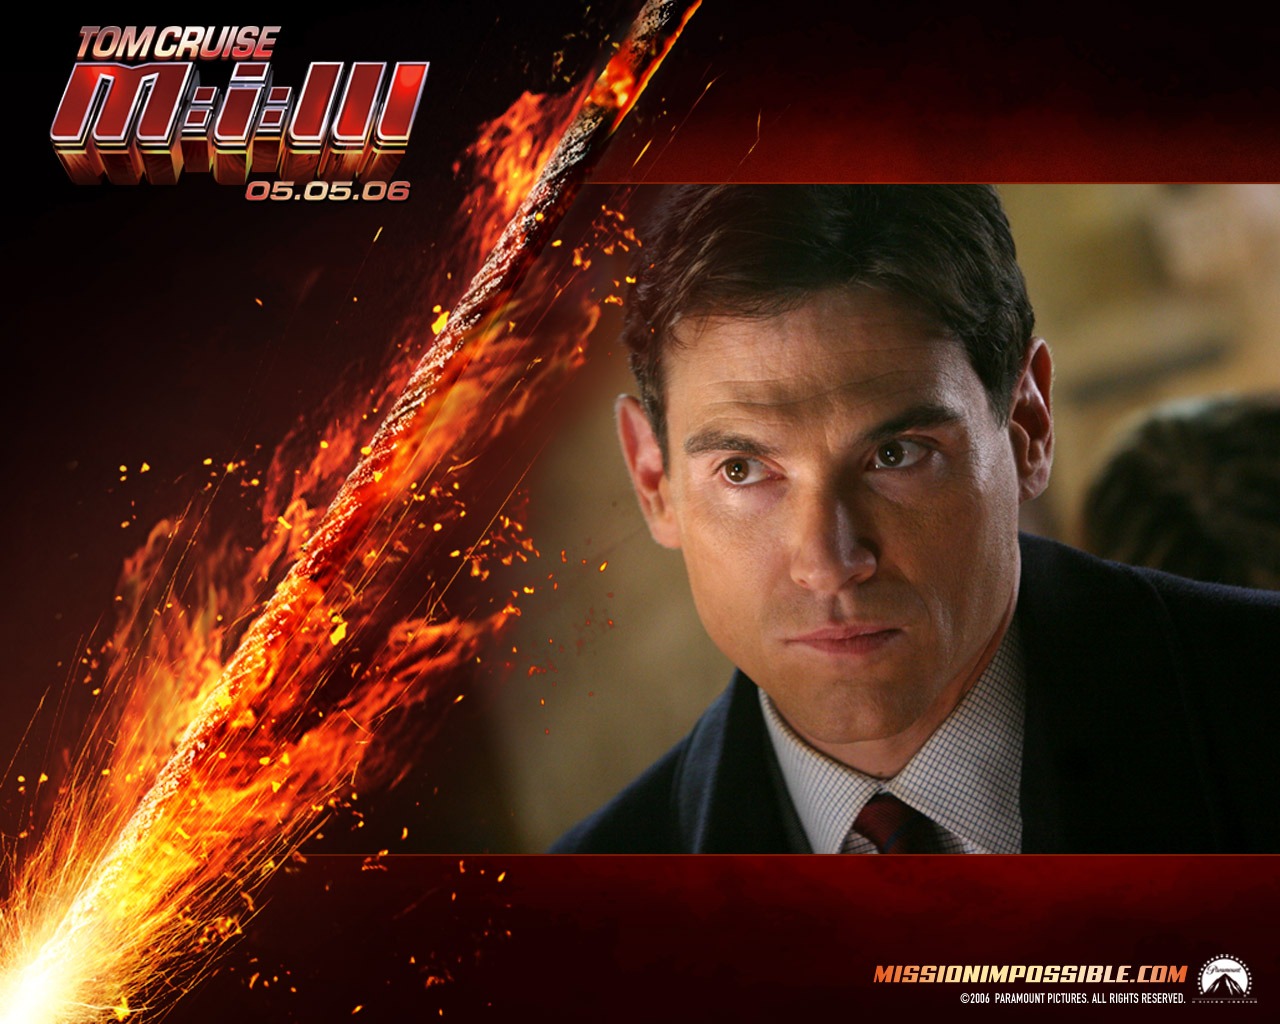 Mission Impossible 3 Wallpaper #9 - 1280x1024